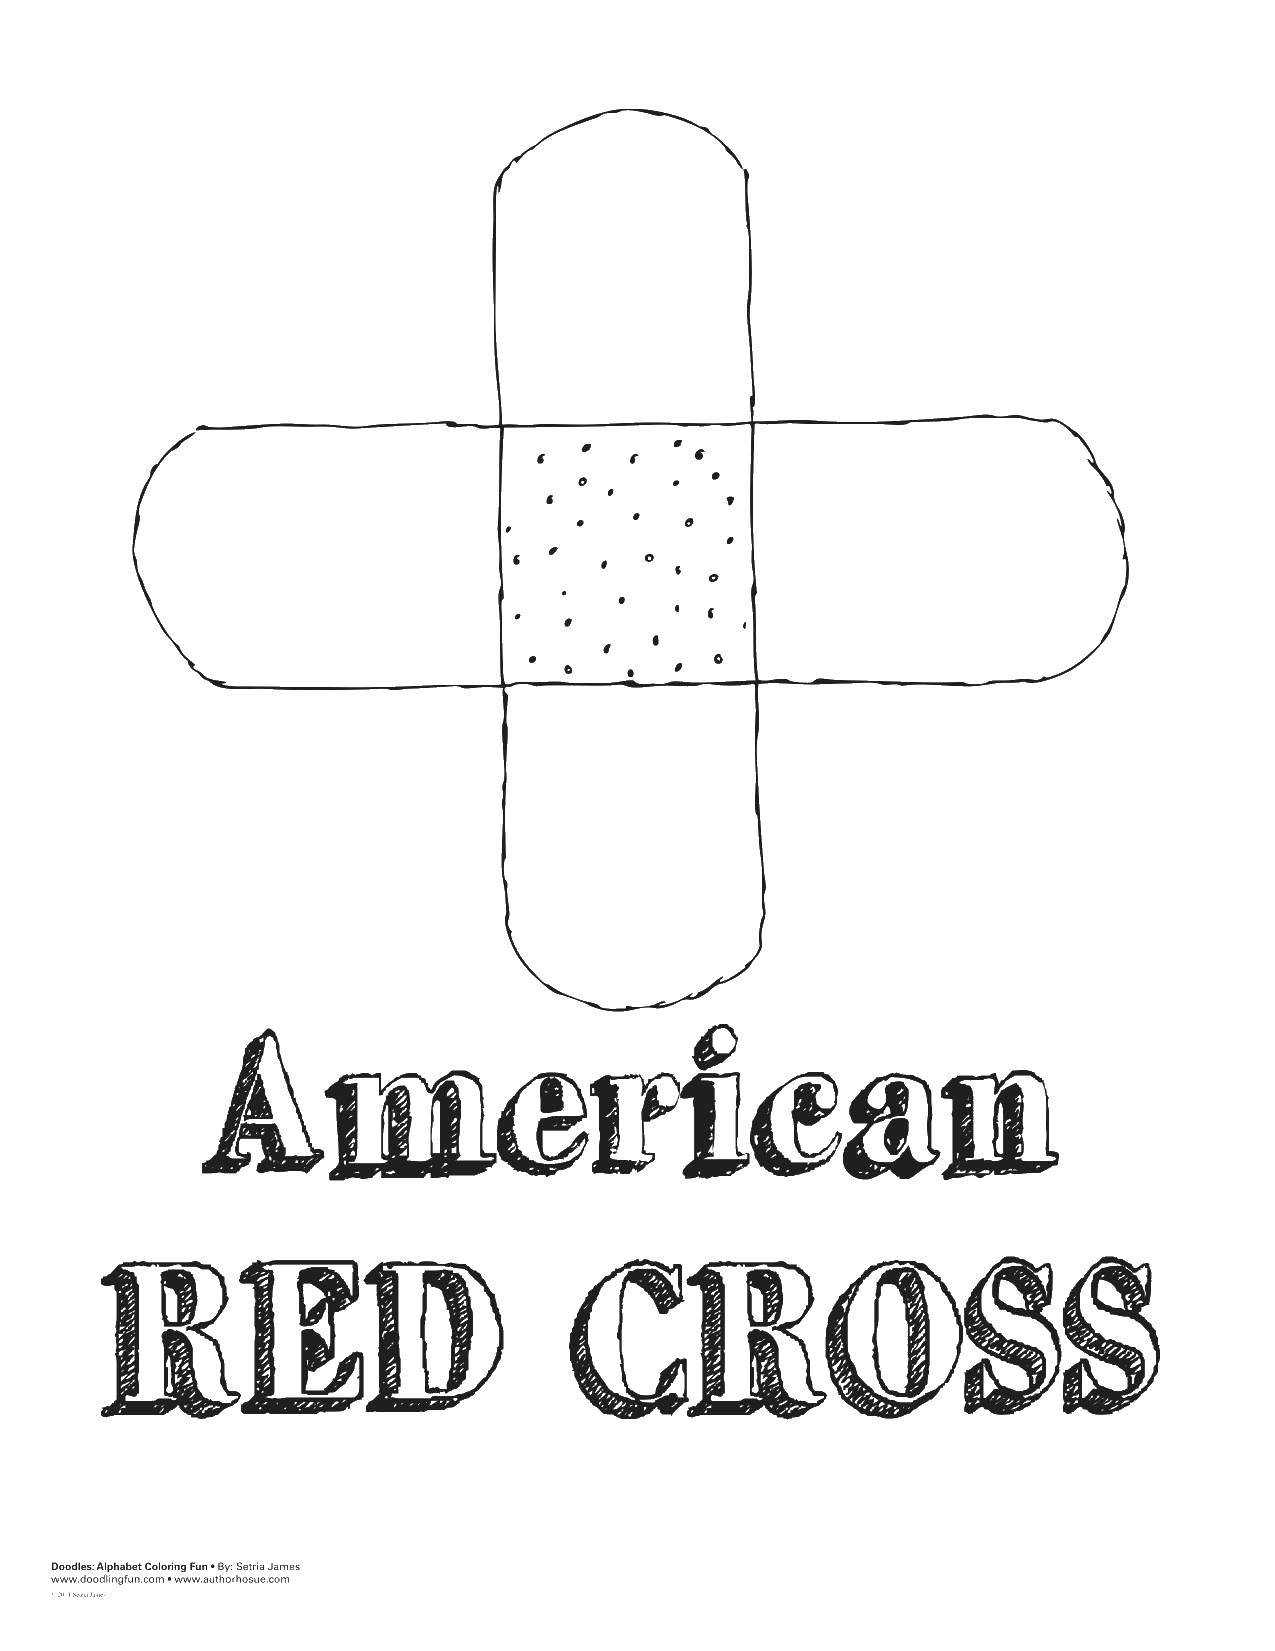 Coloring The American red cross. Category coloring pages cross. Tags:  America, red cross.